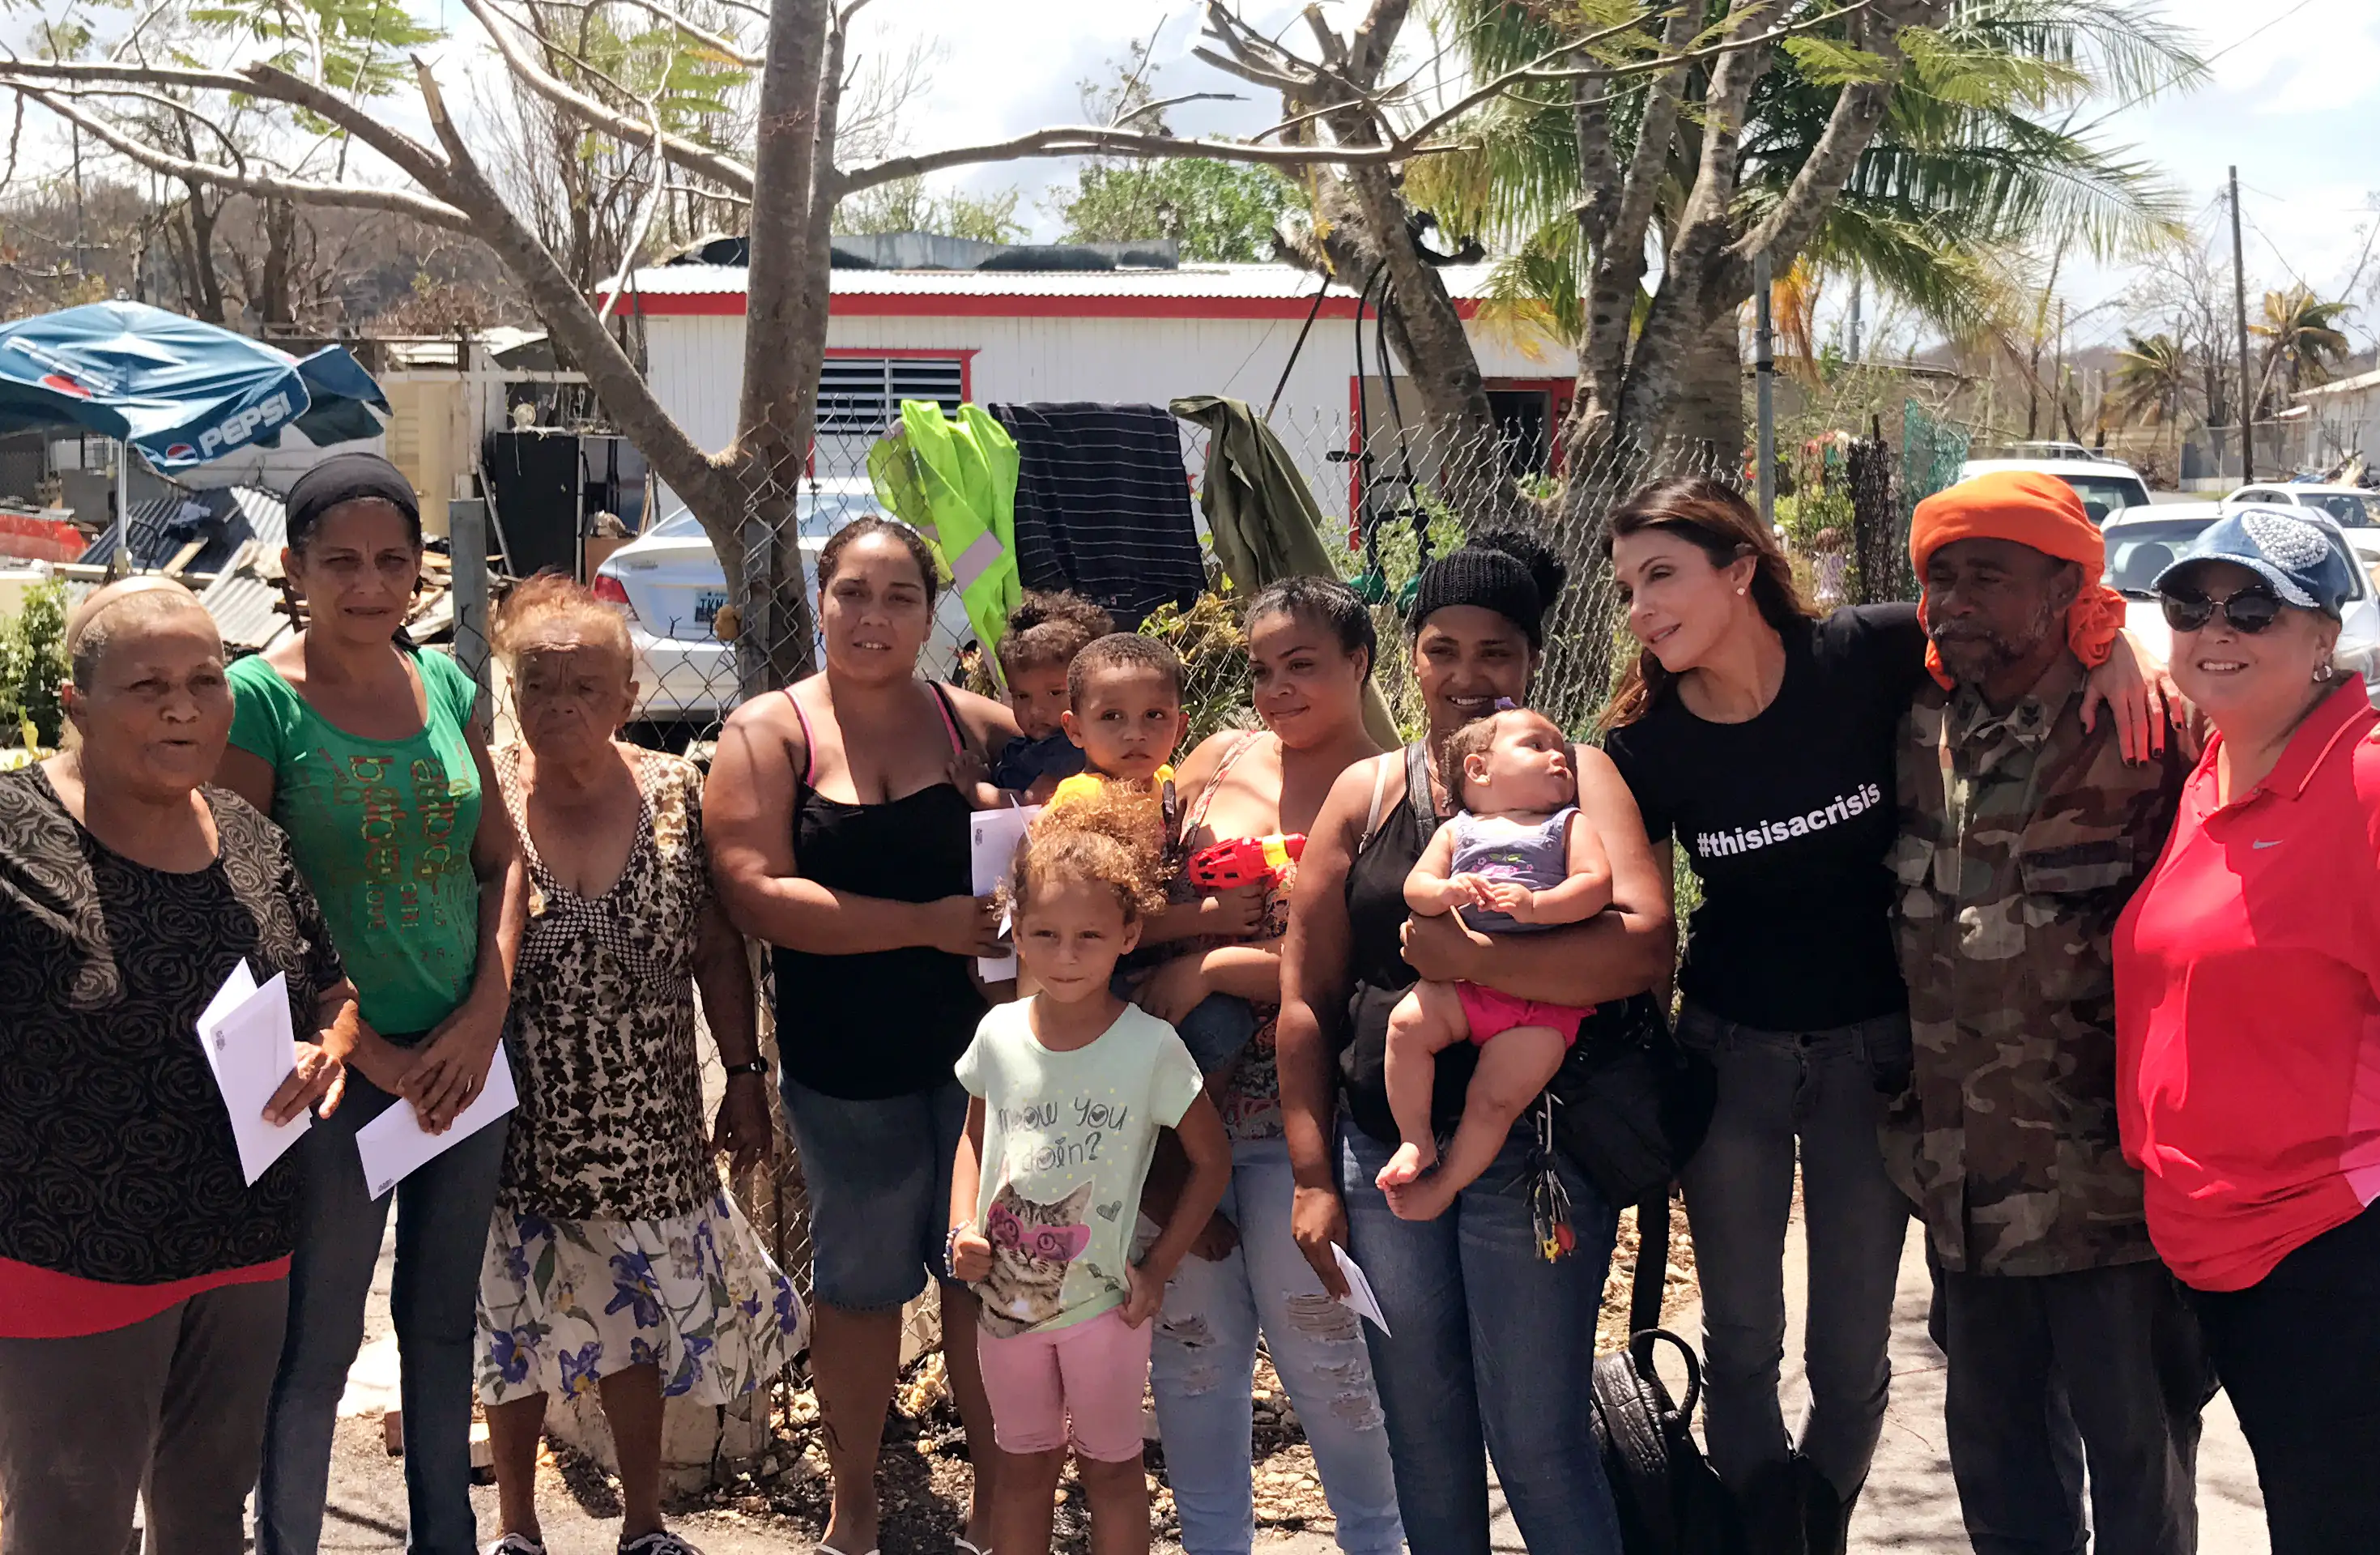 Frankel in 2017 in Puerto Rico, where she has spearheaded relief efforts through her charity